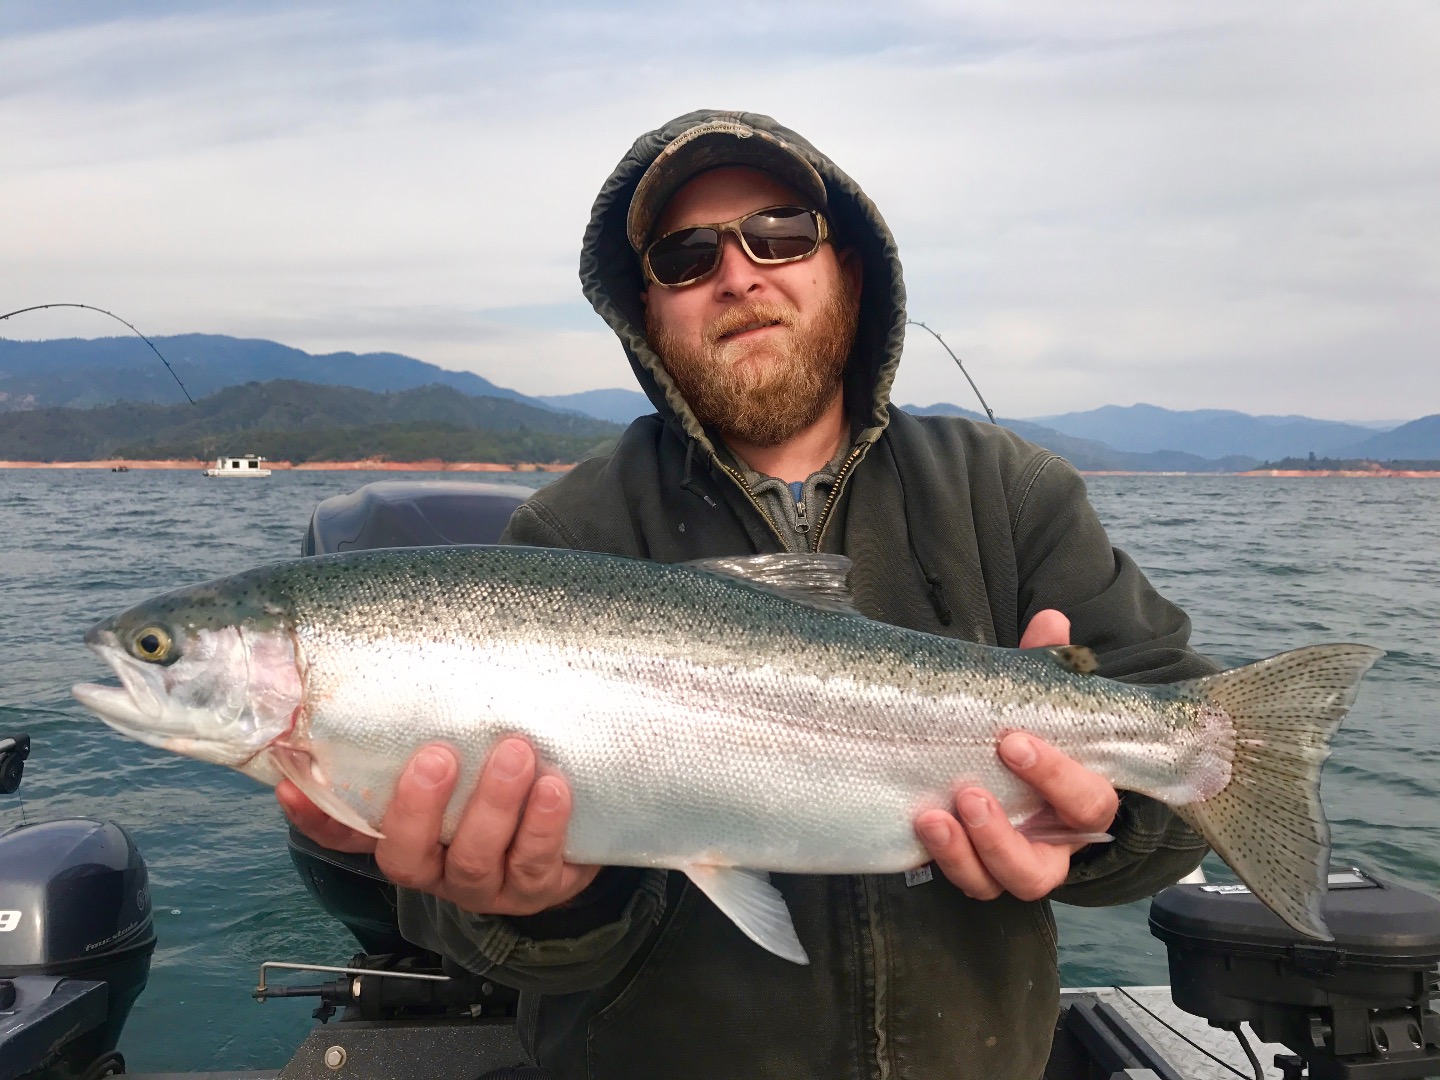 Shasta Lake trout bite still going strong!